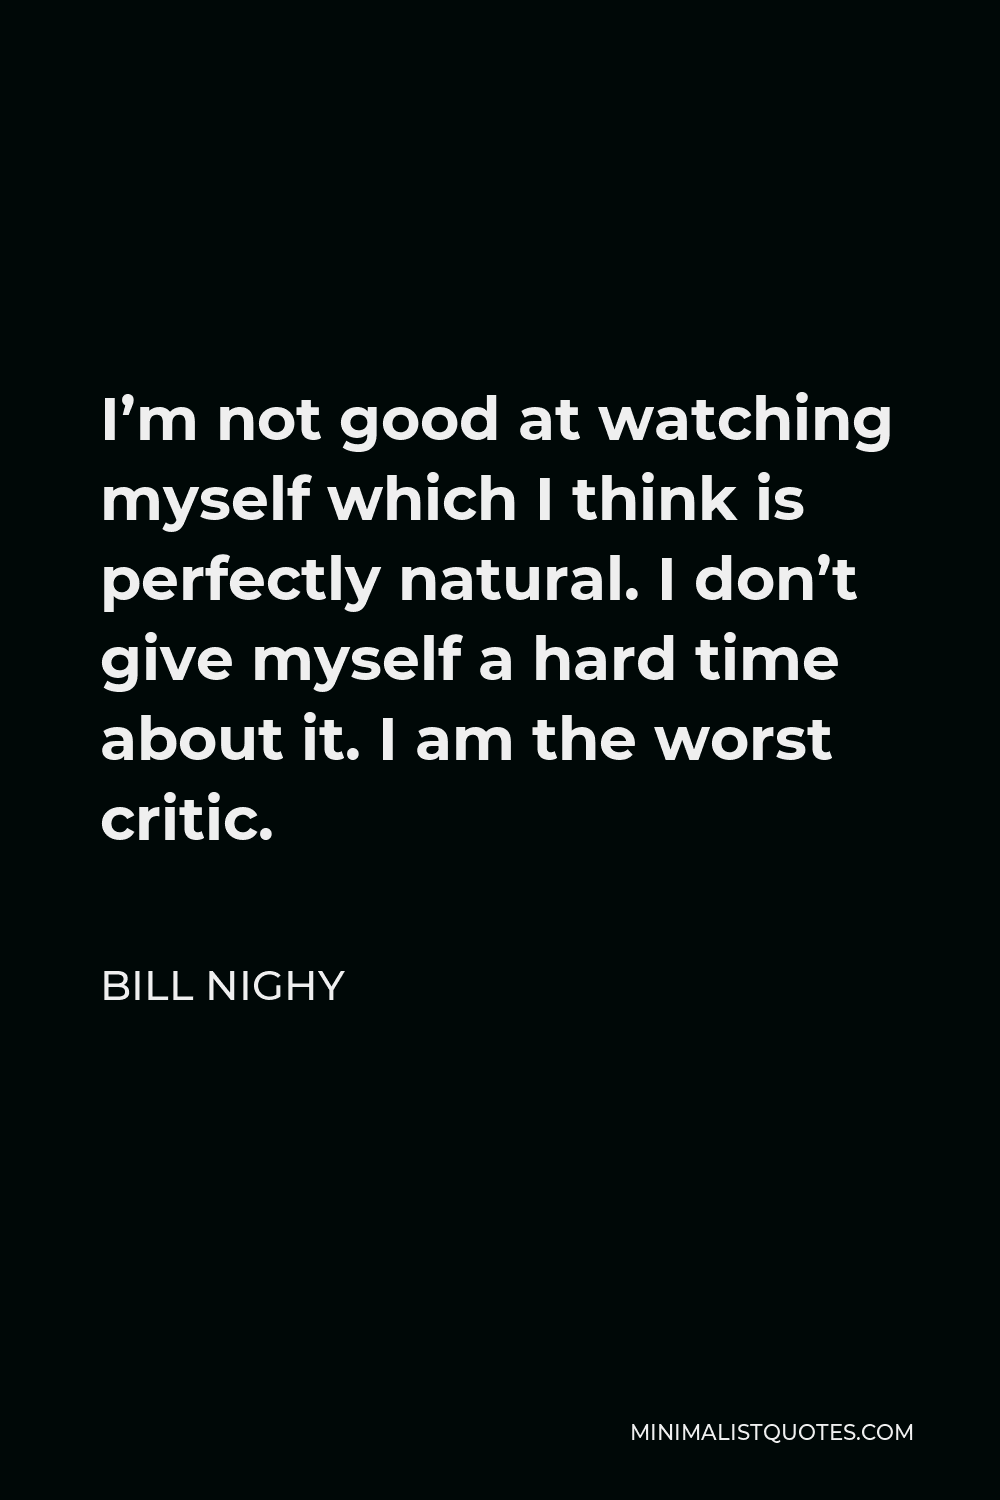 Bill Nighy Quote - I’m not good at watching myself which I think is perfectly natural. I don’t give myself a hard time about it. I am the worst critic.